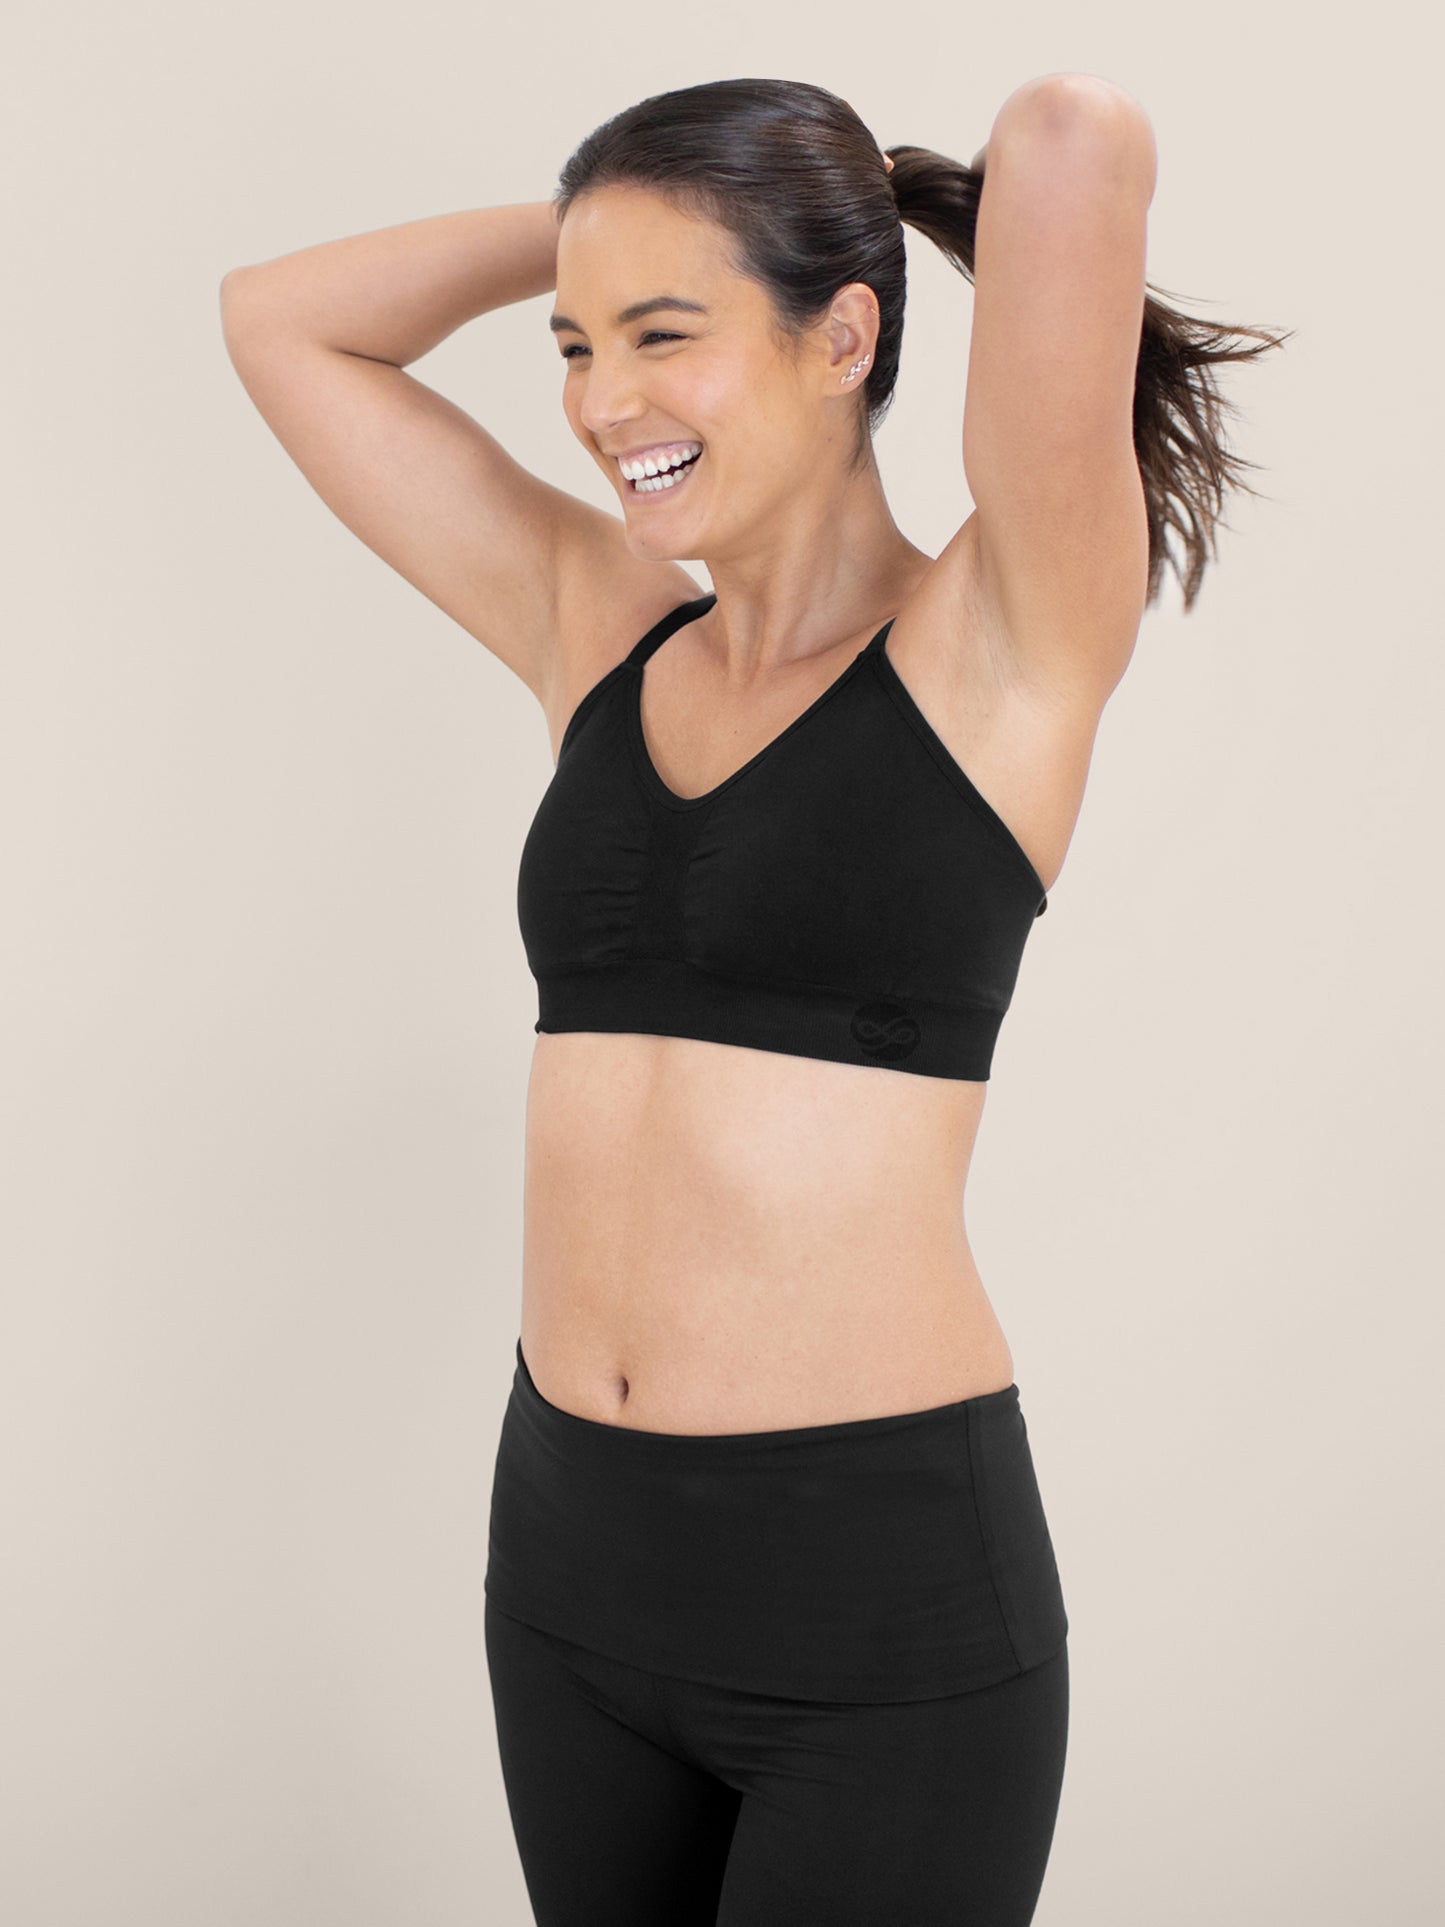 Model with her hands in her ponytail wearing the Diana Sublime® Sports Bra in Black